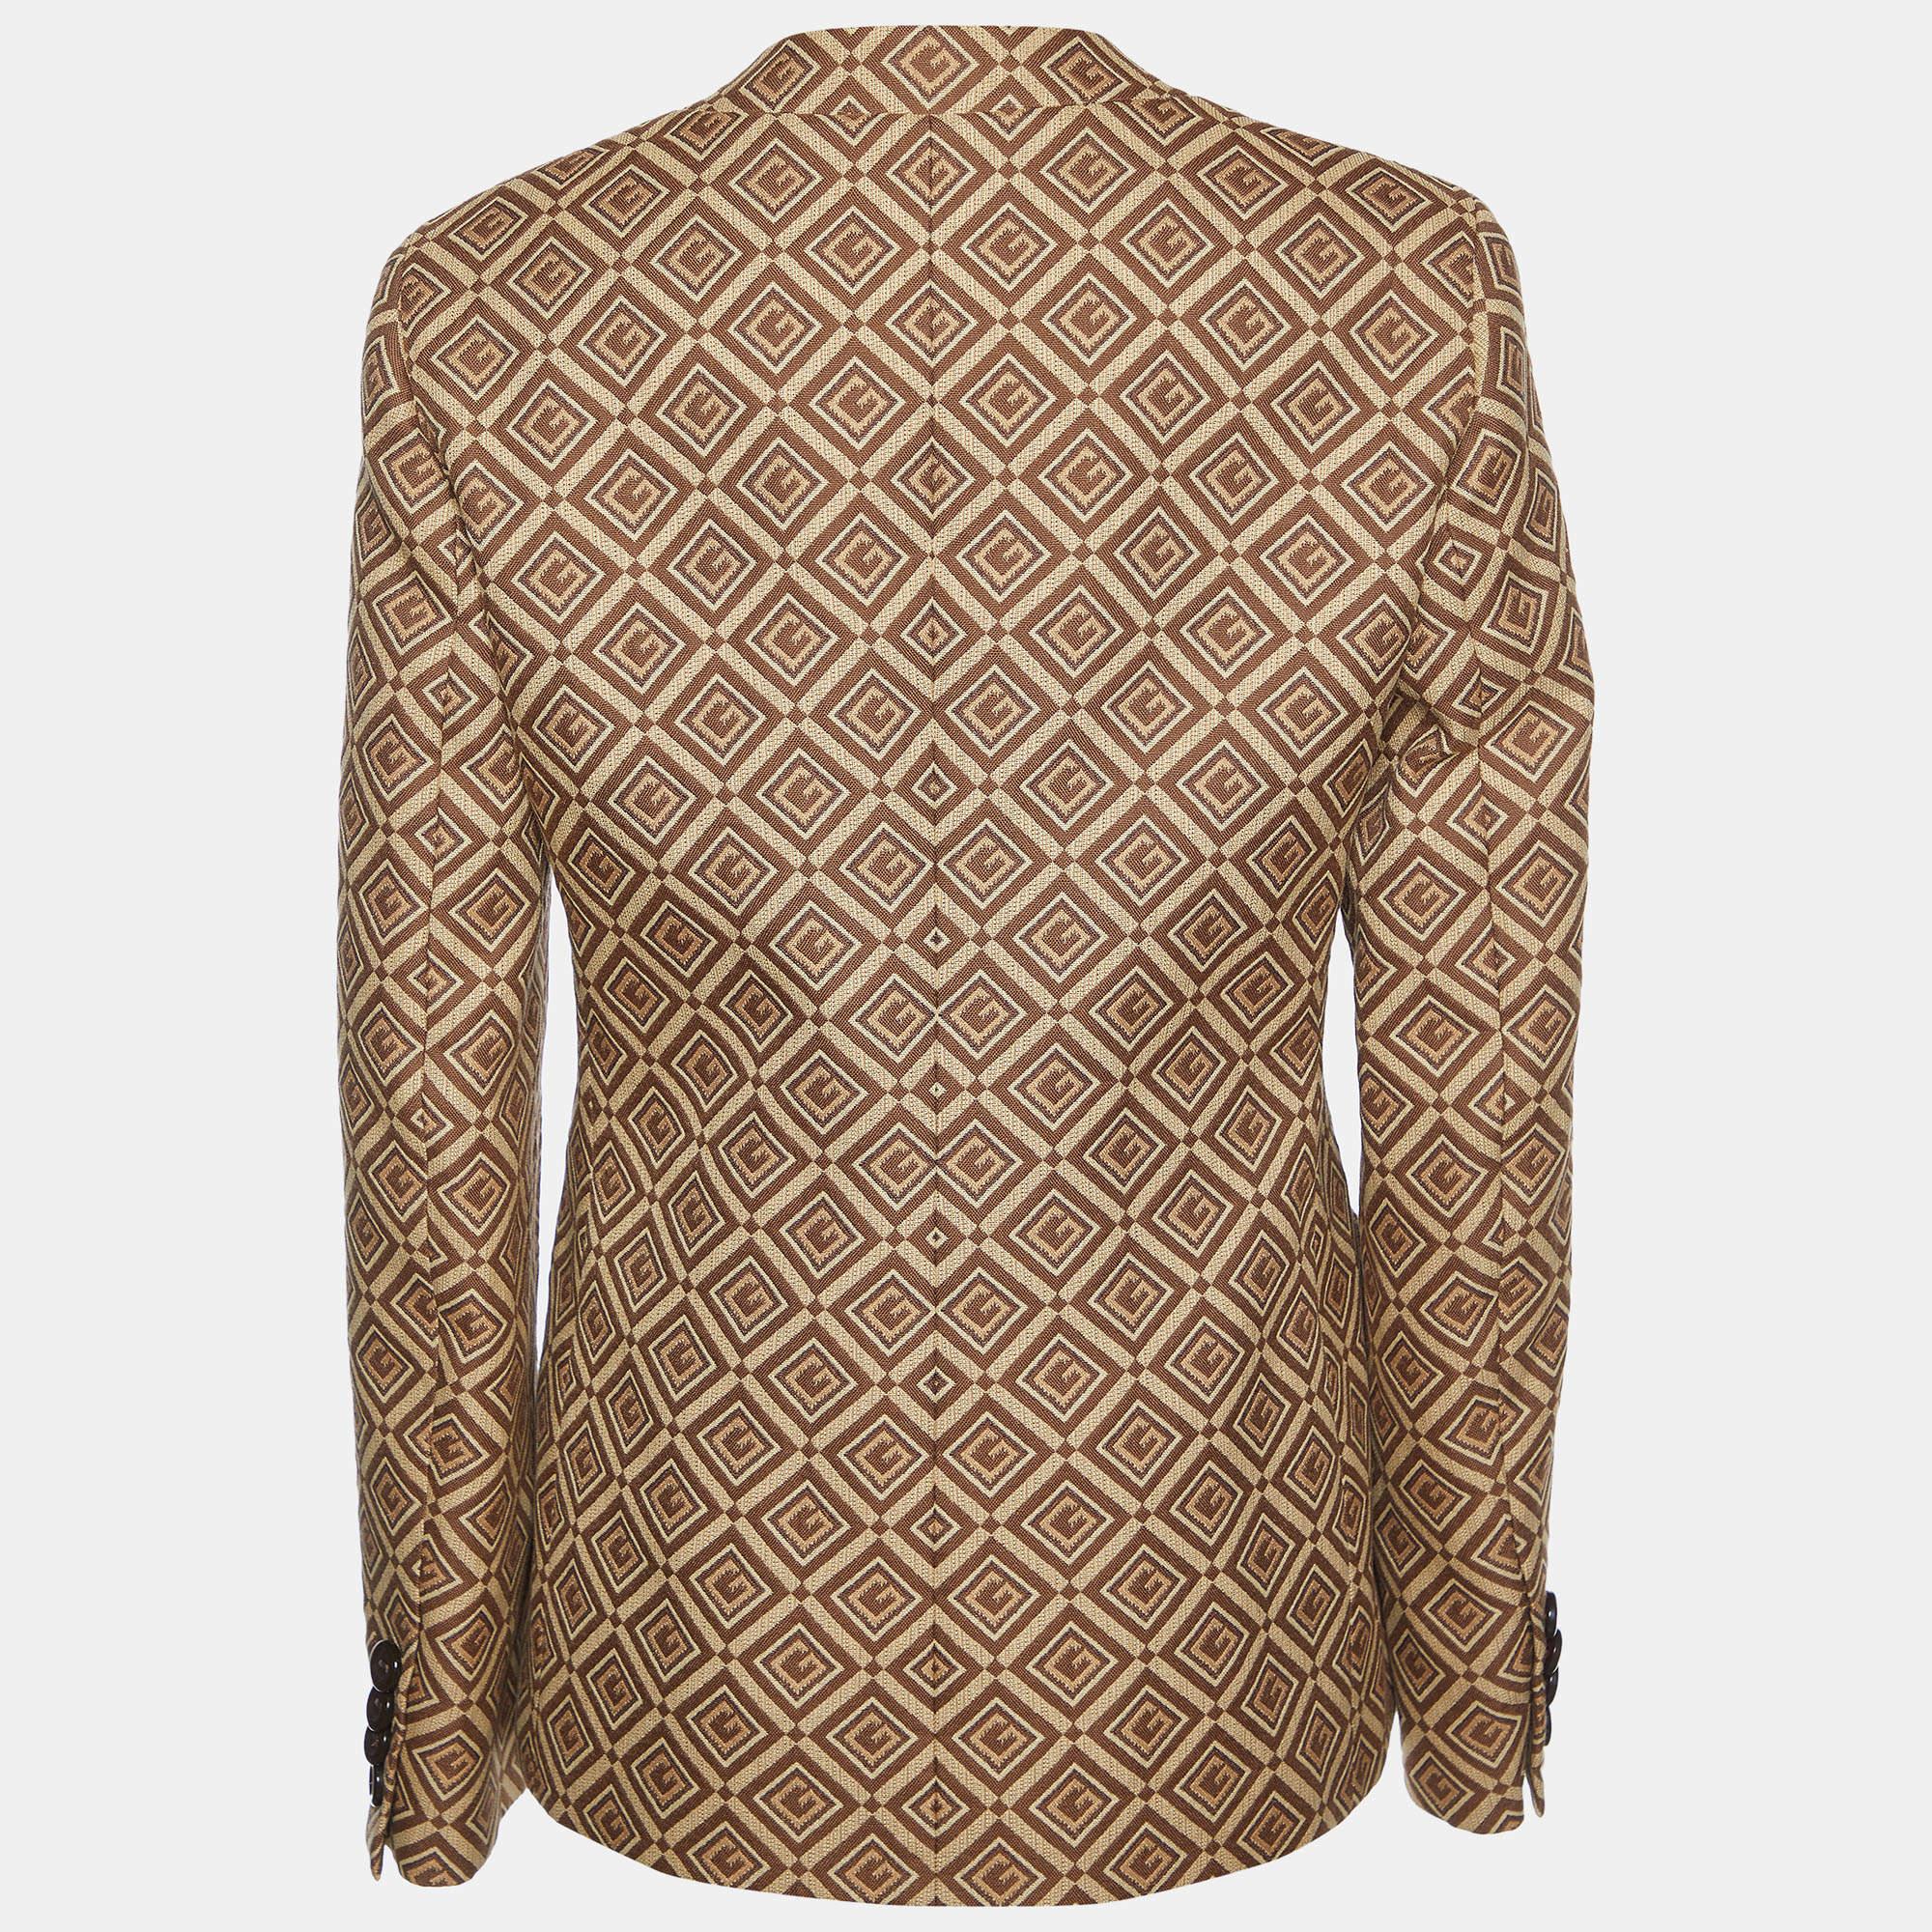 The Gucci blazer is a luxurious and sophisticated piece. Crafted from high-quality cotton, it features a classic double-breasted design adorned with the iconic Gucci logo jacquard pattern. This elegant blazer exudes timeless style and makes a